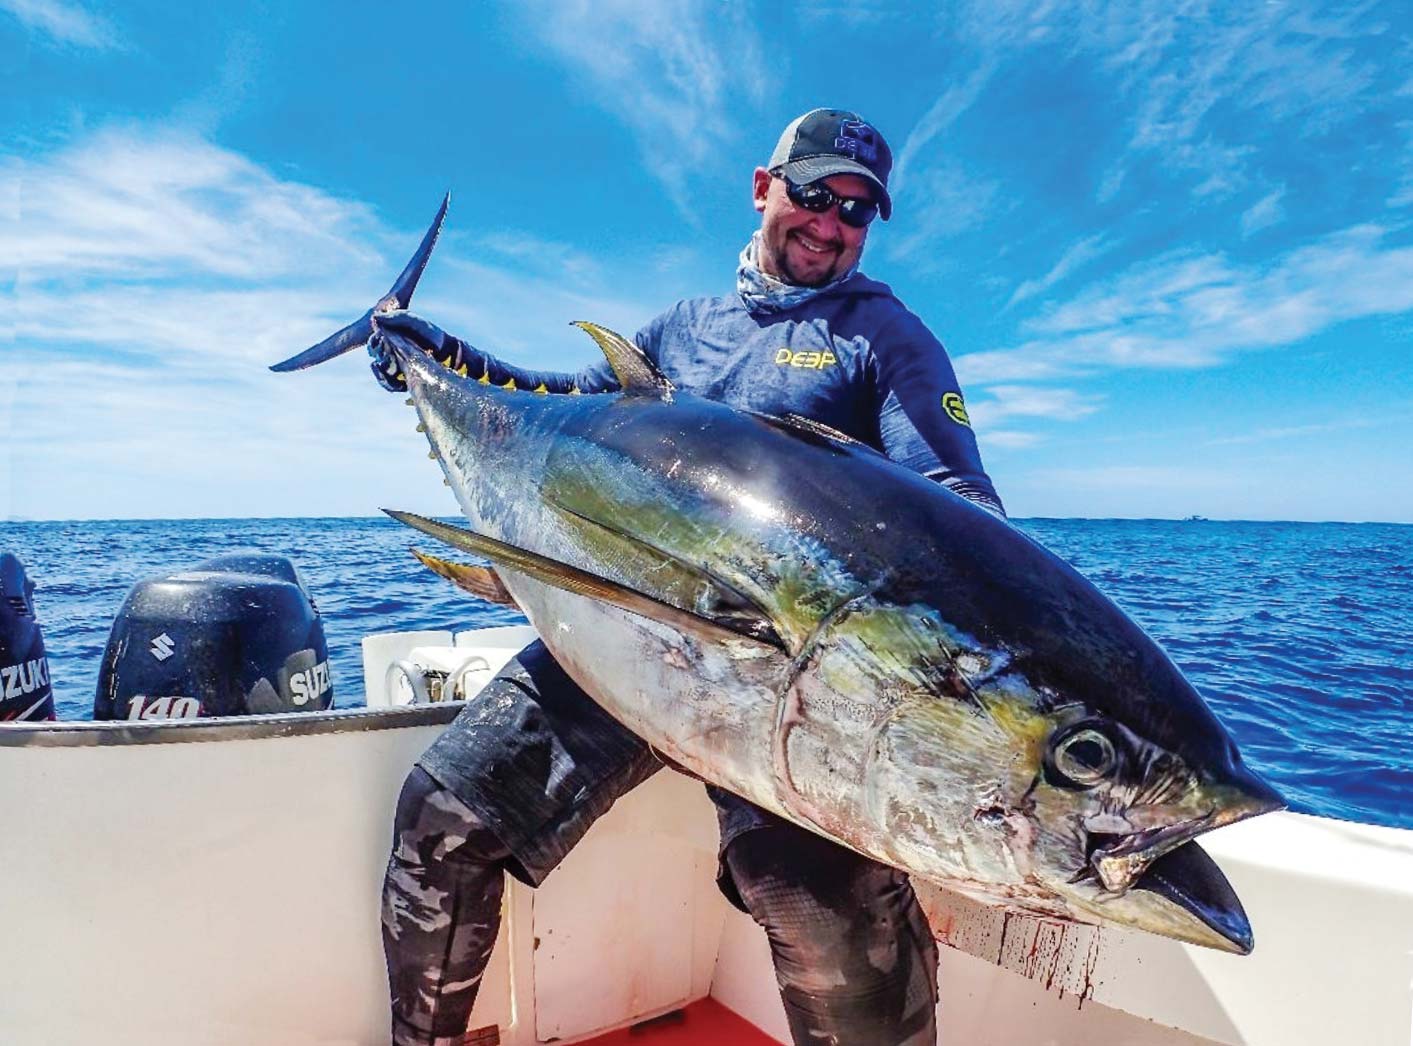 Giant Bluefin Tuna 9 Miles Off of Ocean City - Ocean City MD Fishing